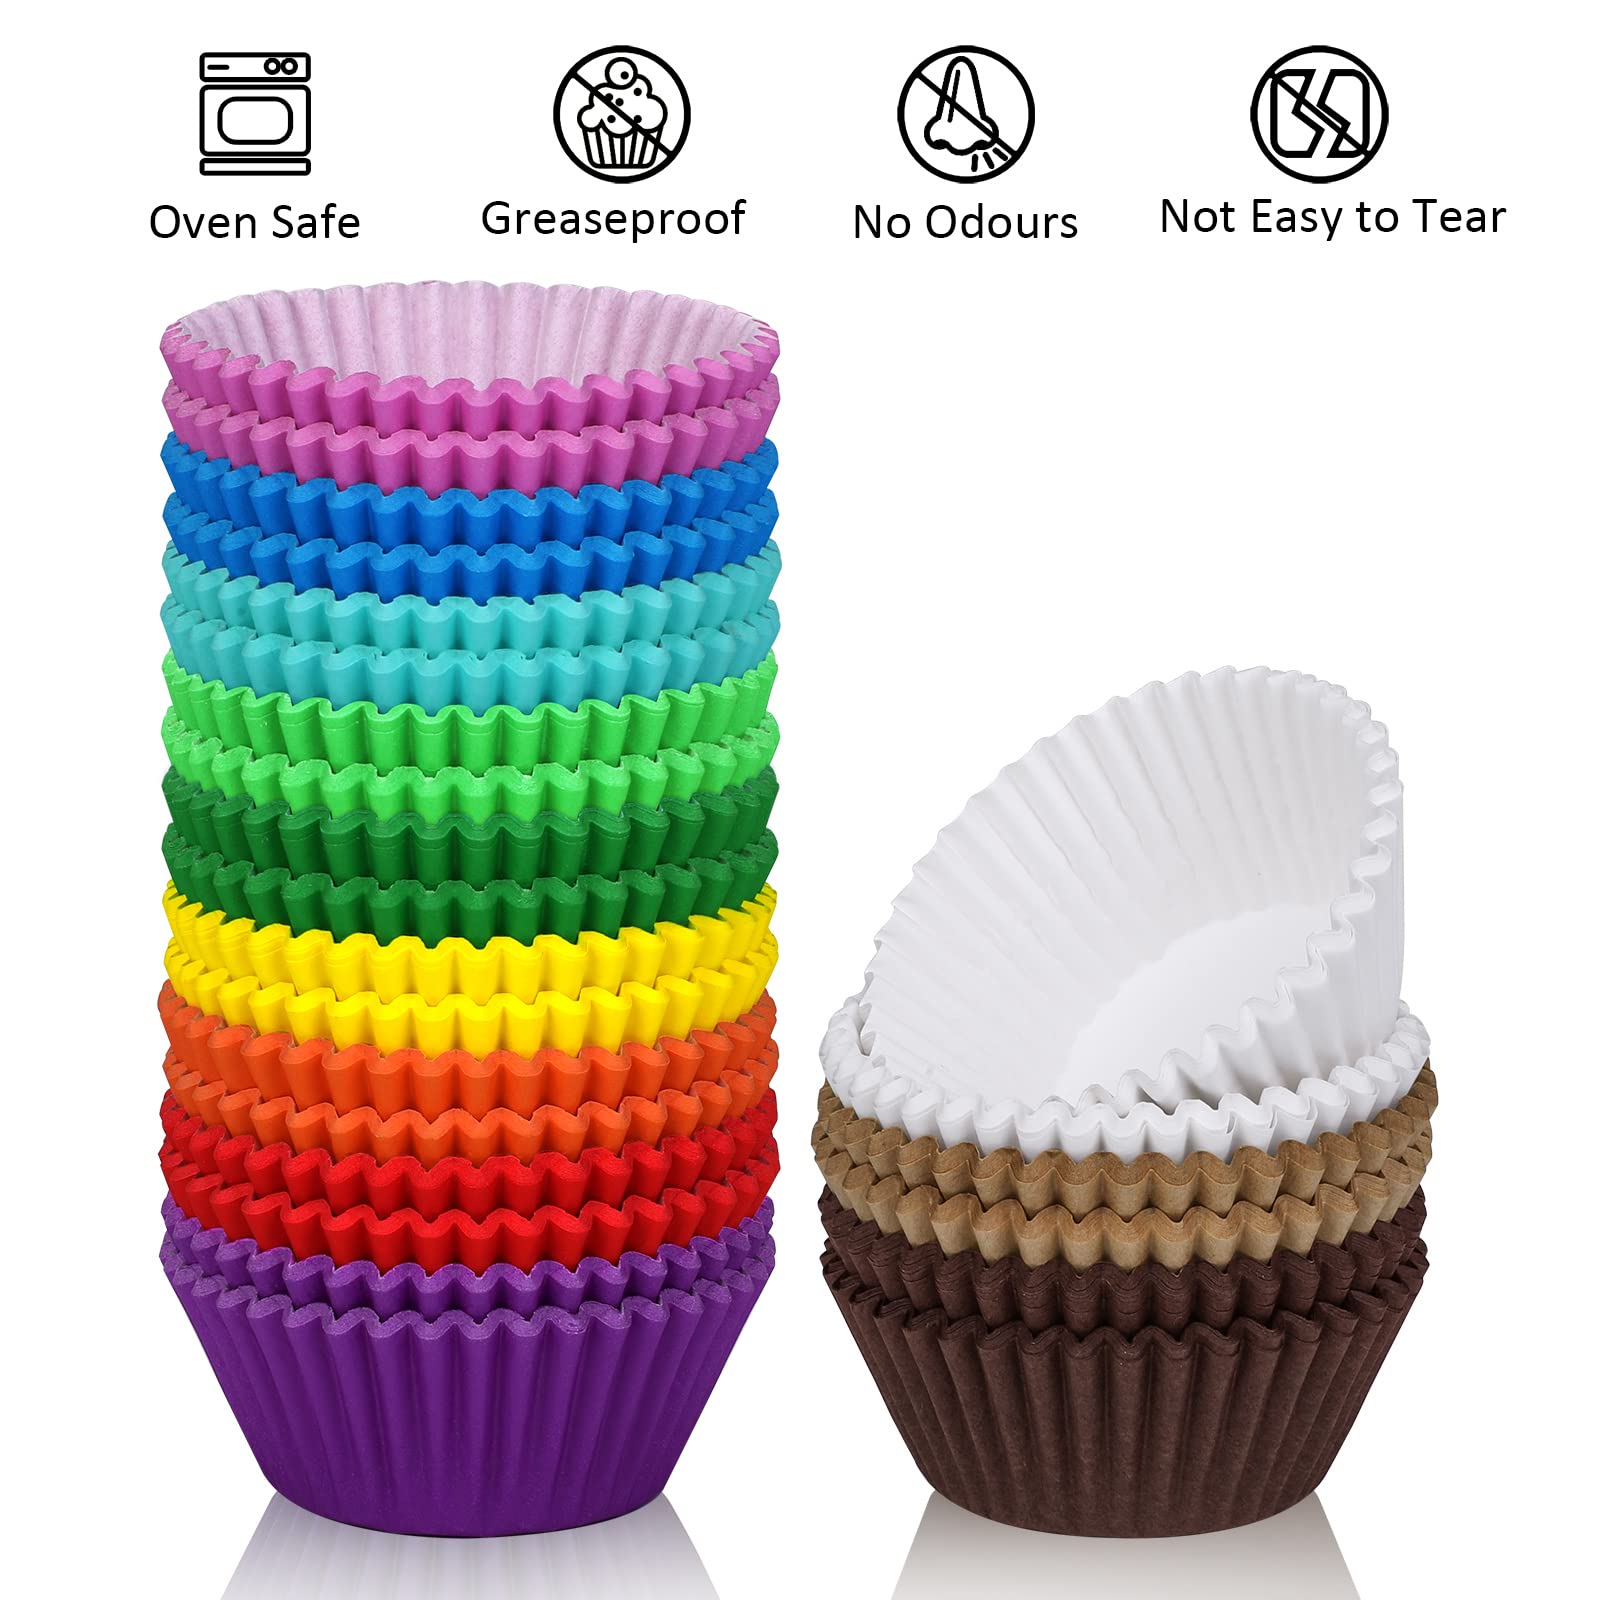 Ruisita 1200 Pieces Mini Cupcake Liners 1.25 Inch Paper Baking Cups Muffin Liners Cupcake Wrappers Creaseproof Muffin Cups for Weddings, Birthdays, Baby Showers, Assorted Colors